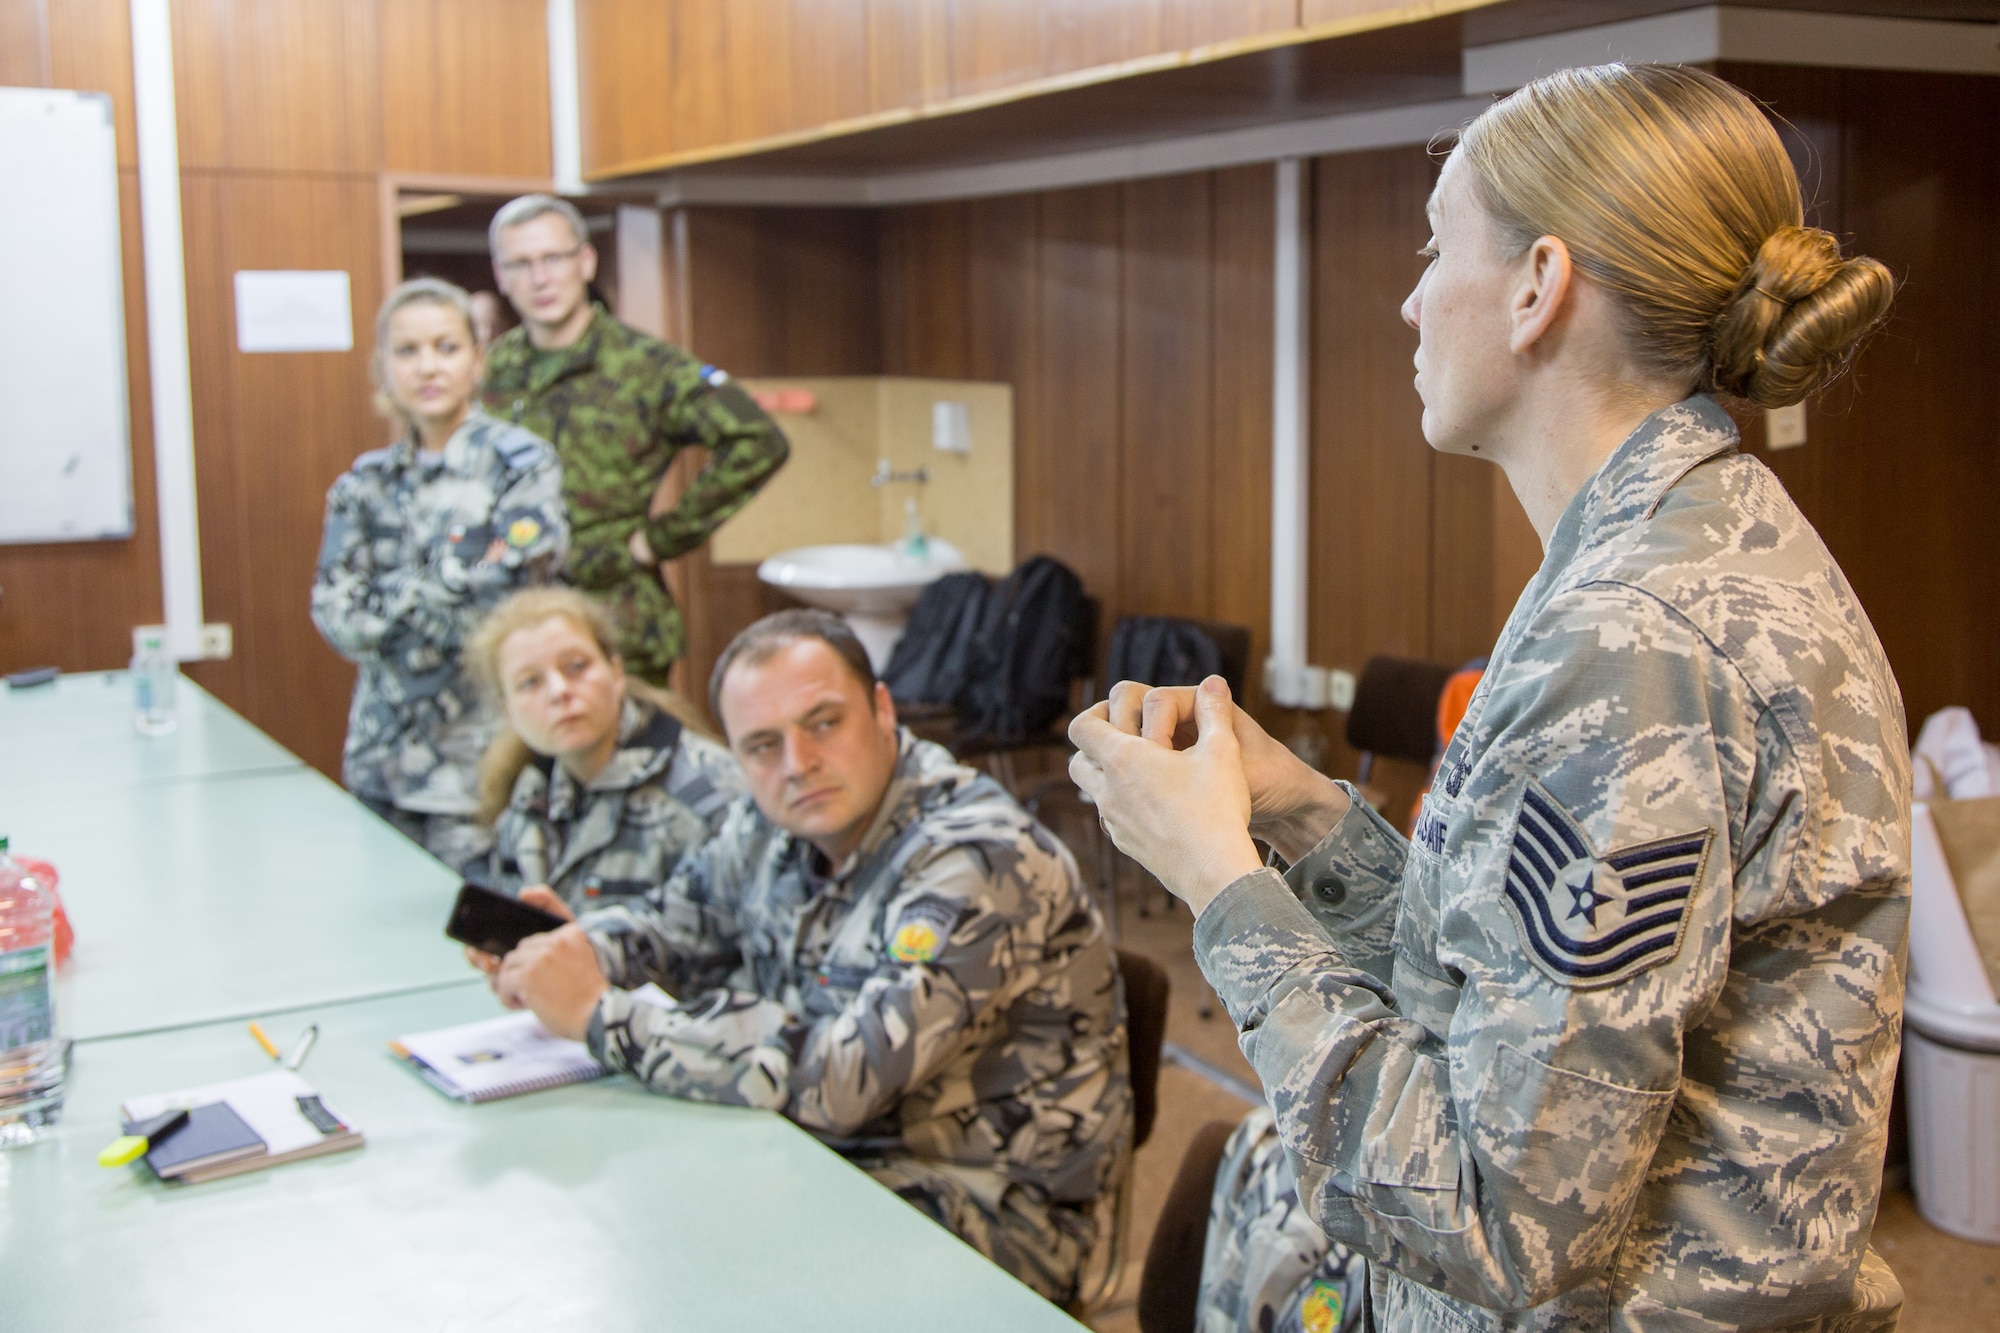 Tech. Sgt. Sandra Wellman, a Kisling NCOA instructor, talks about the critical role NCOs play in USAF operations with international students during the first ever IEAFA combined international officer and NCO PME course held in Sofia, Bulgaria, Nov. 2-13, 2015.  Twenty-three students from Bulgaria, Czech Republic, Estonia, and Hungary participated in this inagural course (U.S. Air Force photo/SMSgt Travis Robbins/Released)